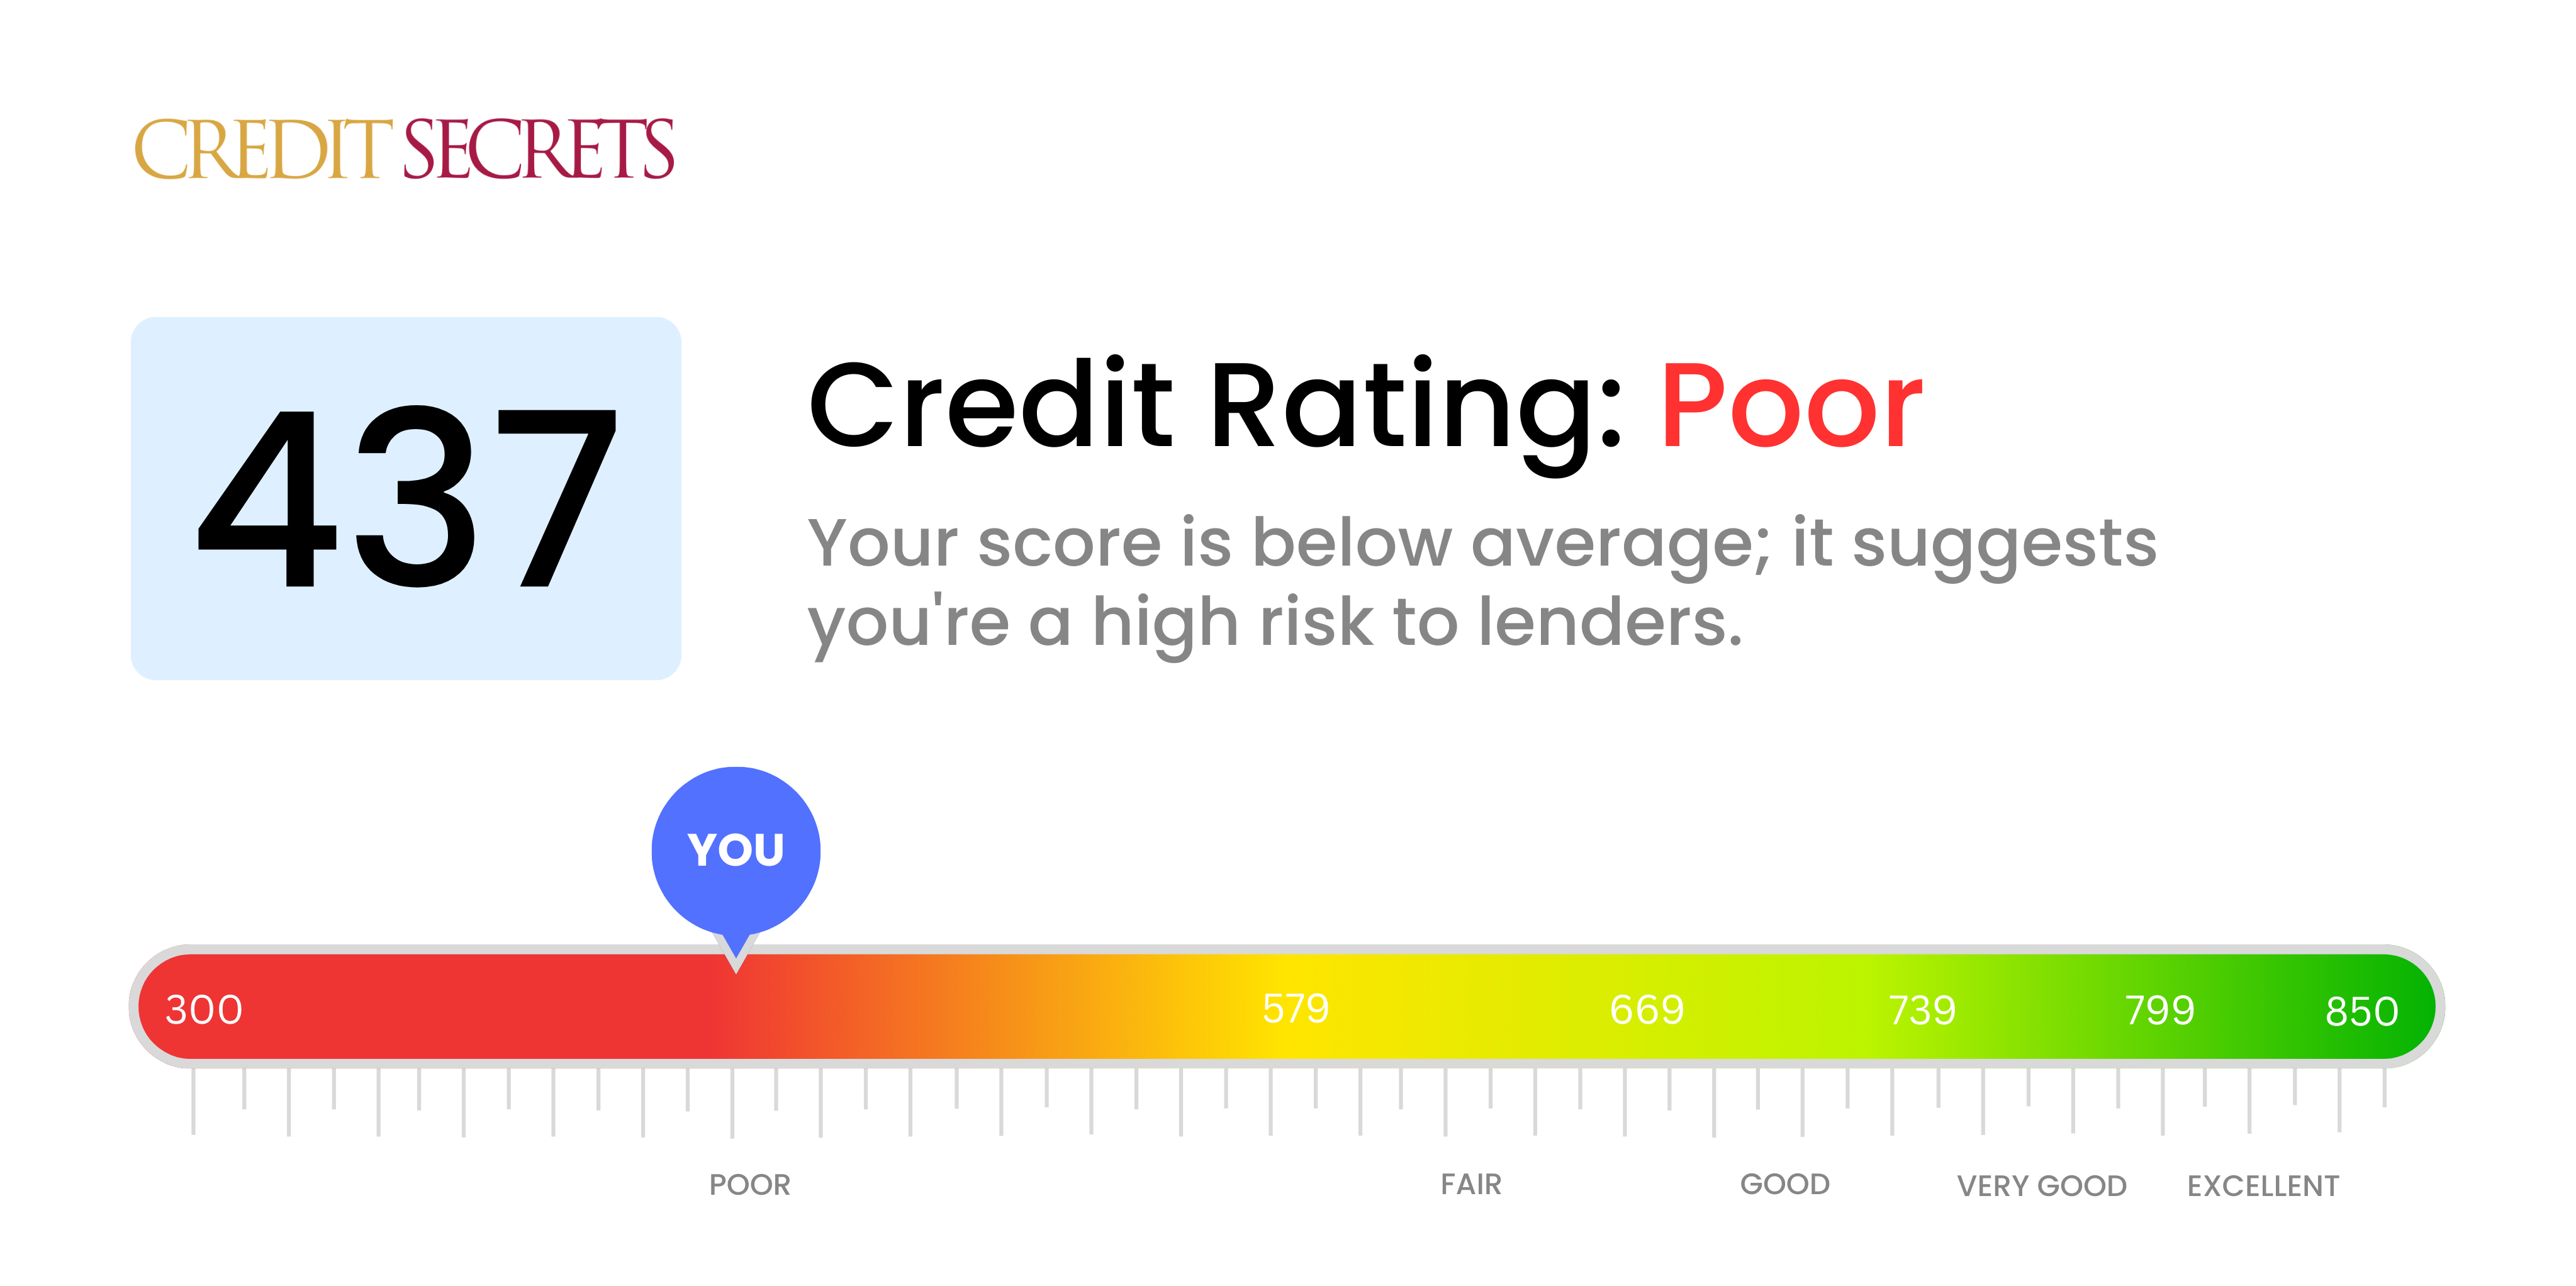 Is 437 a good credit score?